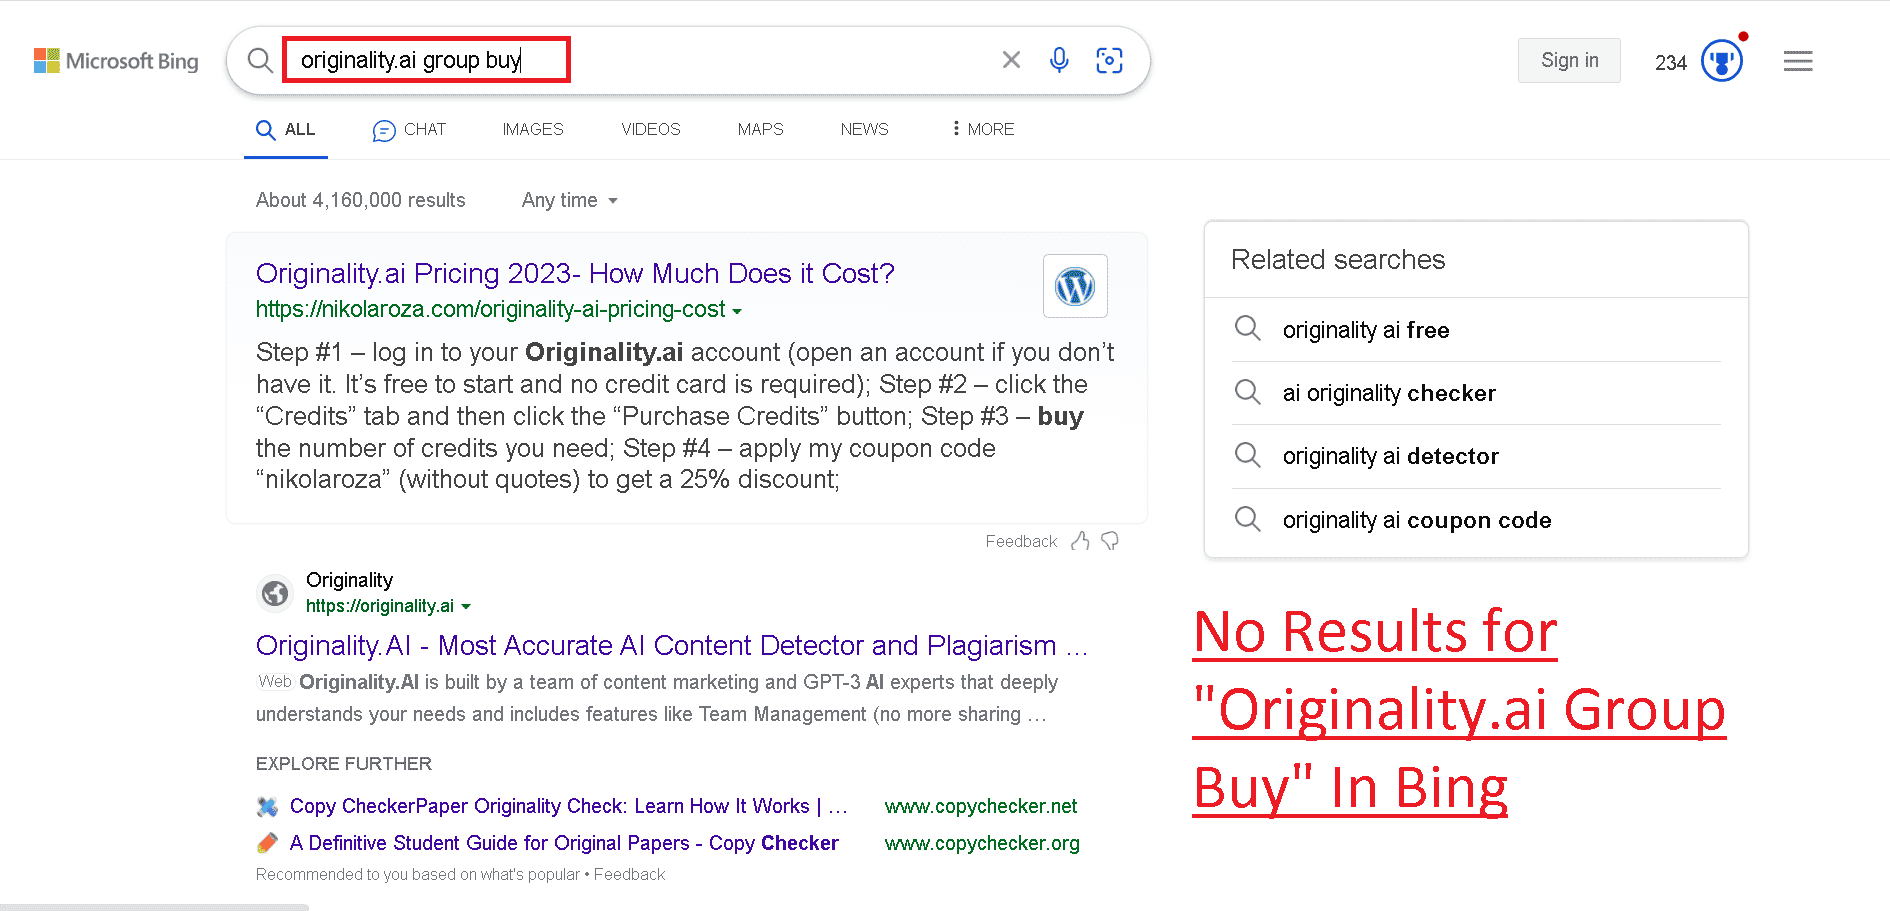 Originality.ai group buy query shows no relevant results in Bing